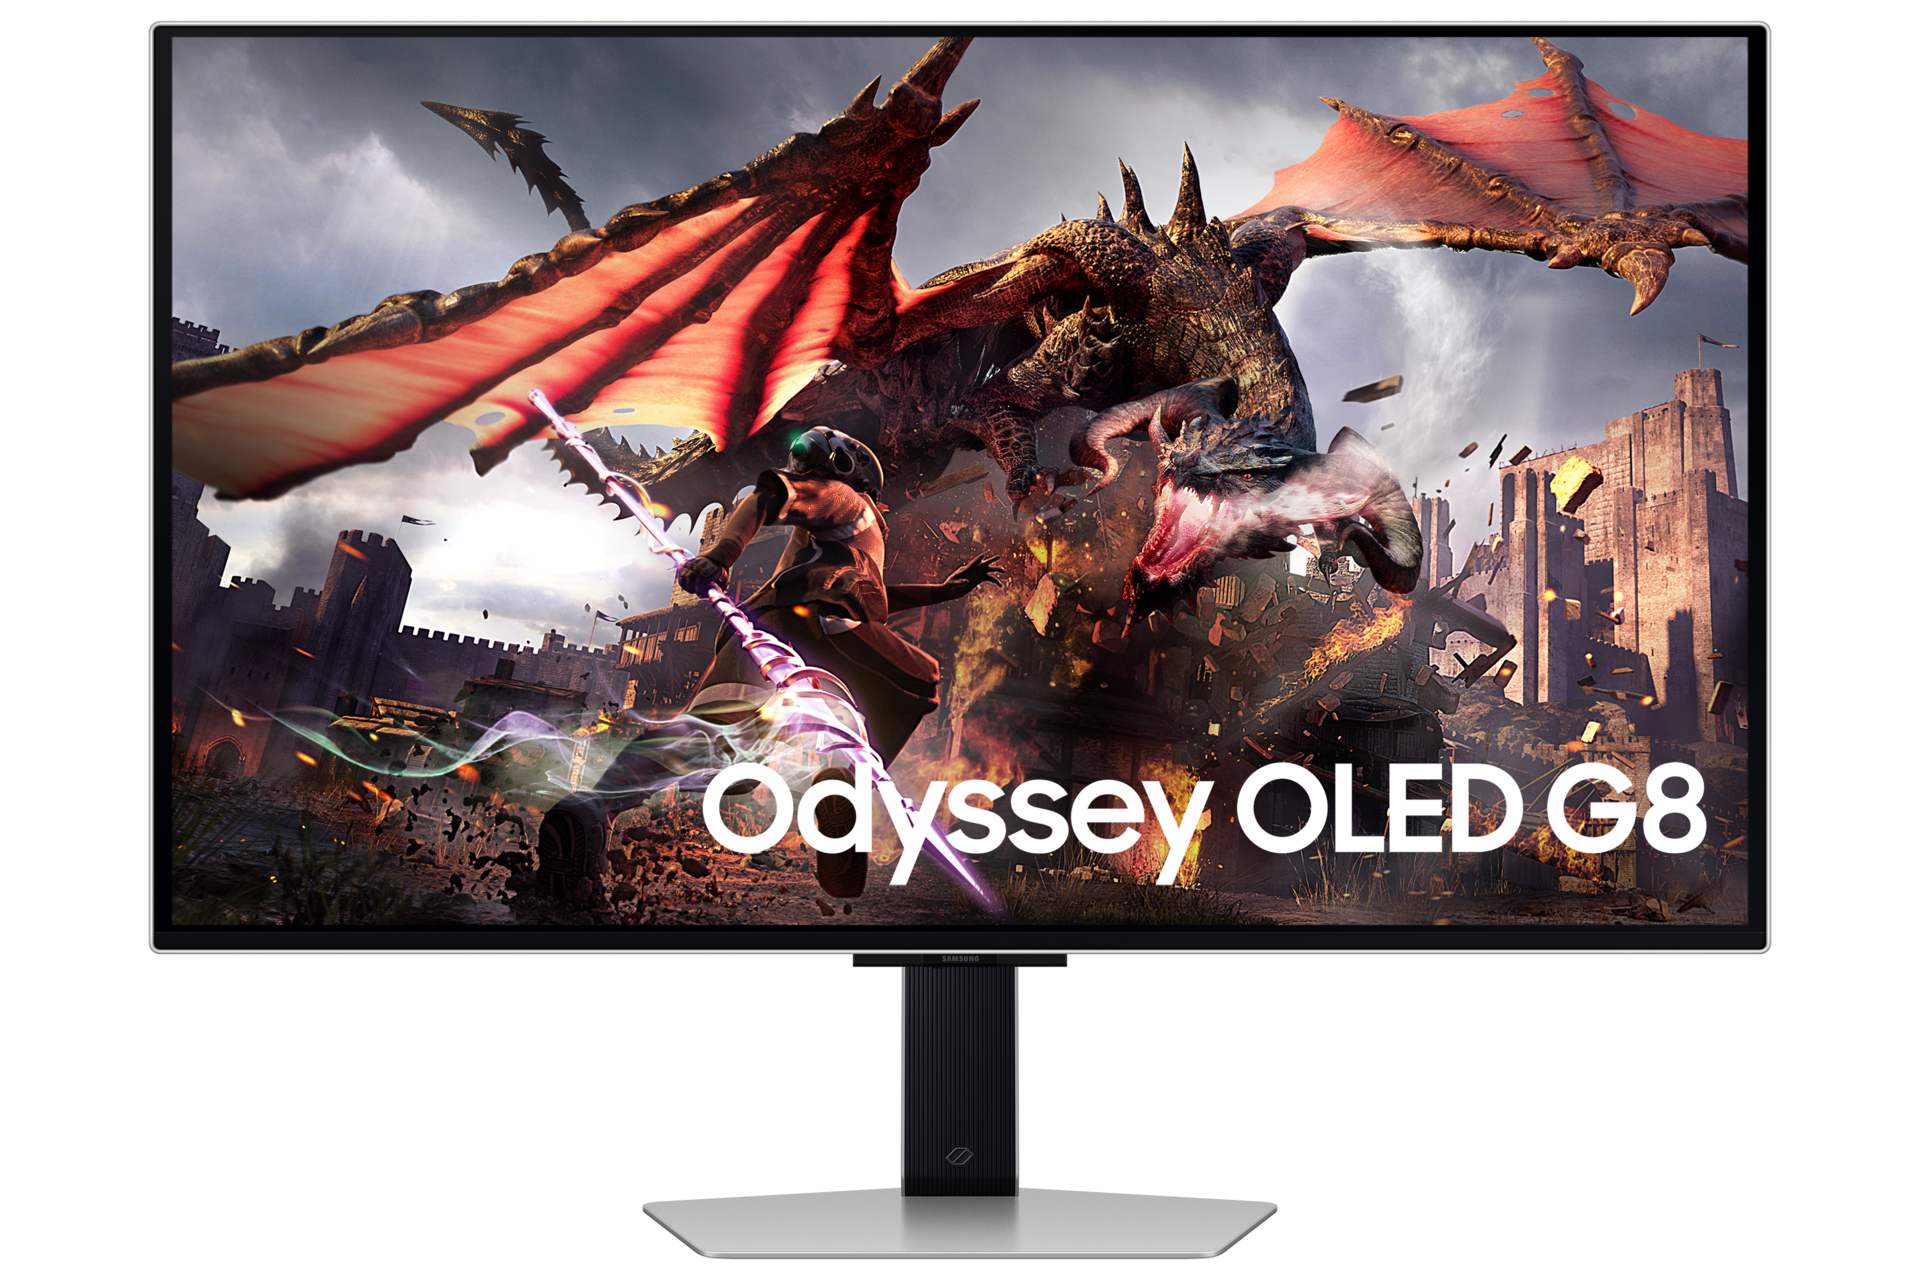 Front of Samsung Odyssey OLED G8 G80SD with dragon and warrior on screen.